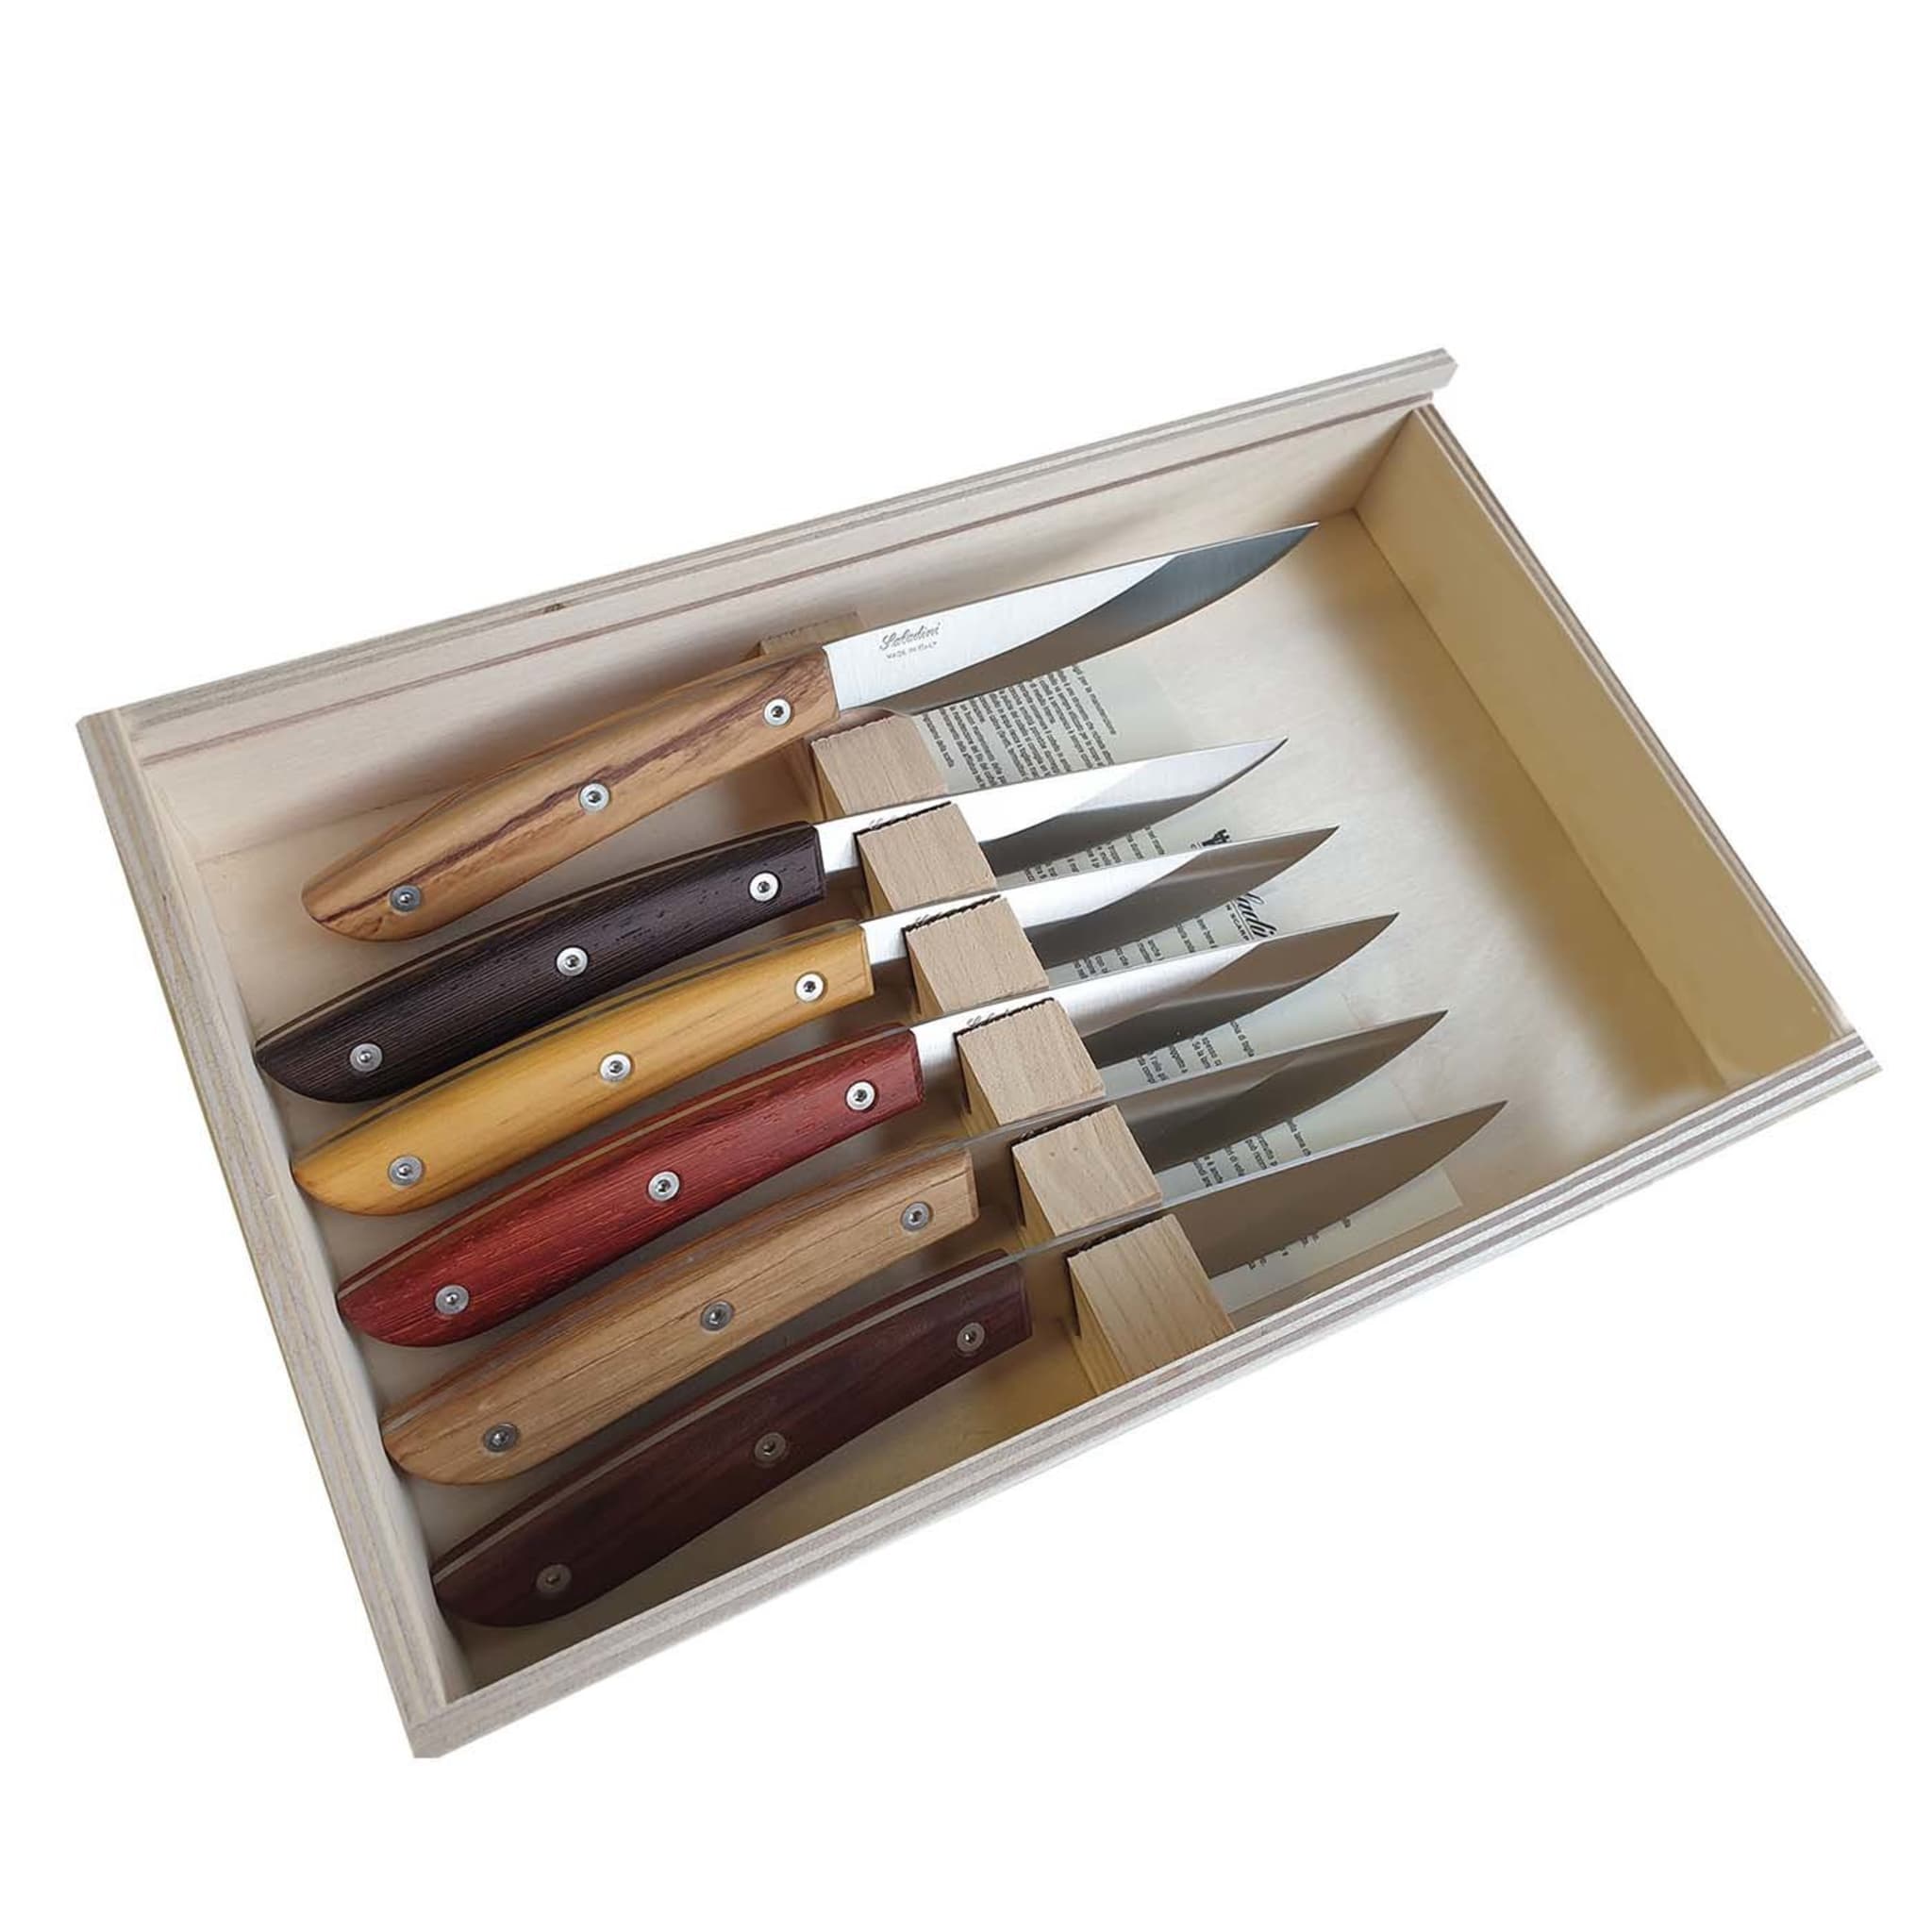 Coltelleria Saladini - Cheese Knife Set of 5 with Ox Horn Handle